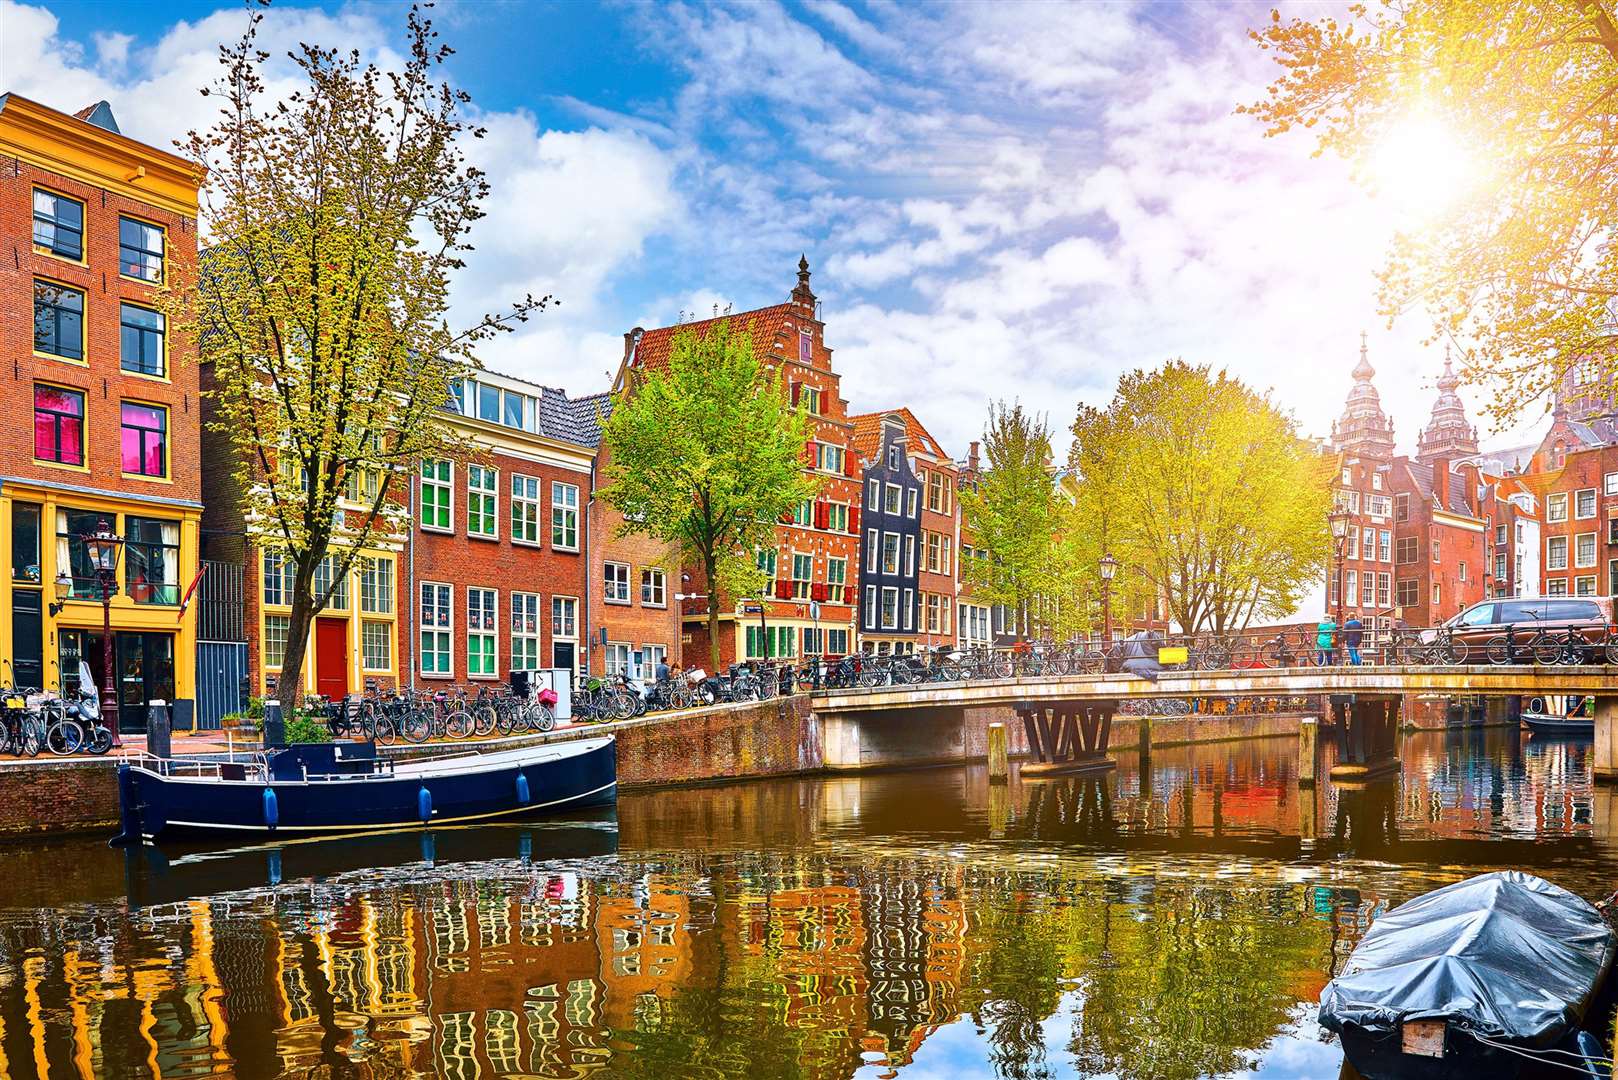 The perfect Instagram moment: Amsterdam's typical canal-side houses with colourful gable-fronted façades. Picture: iStock/PA